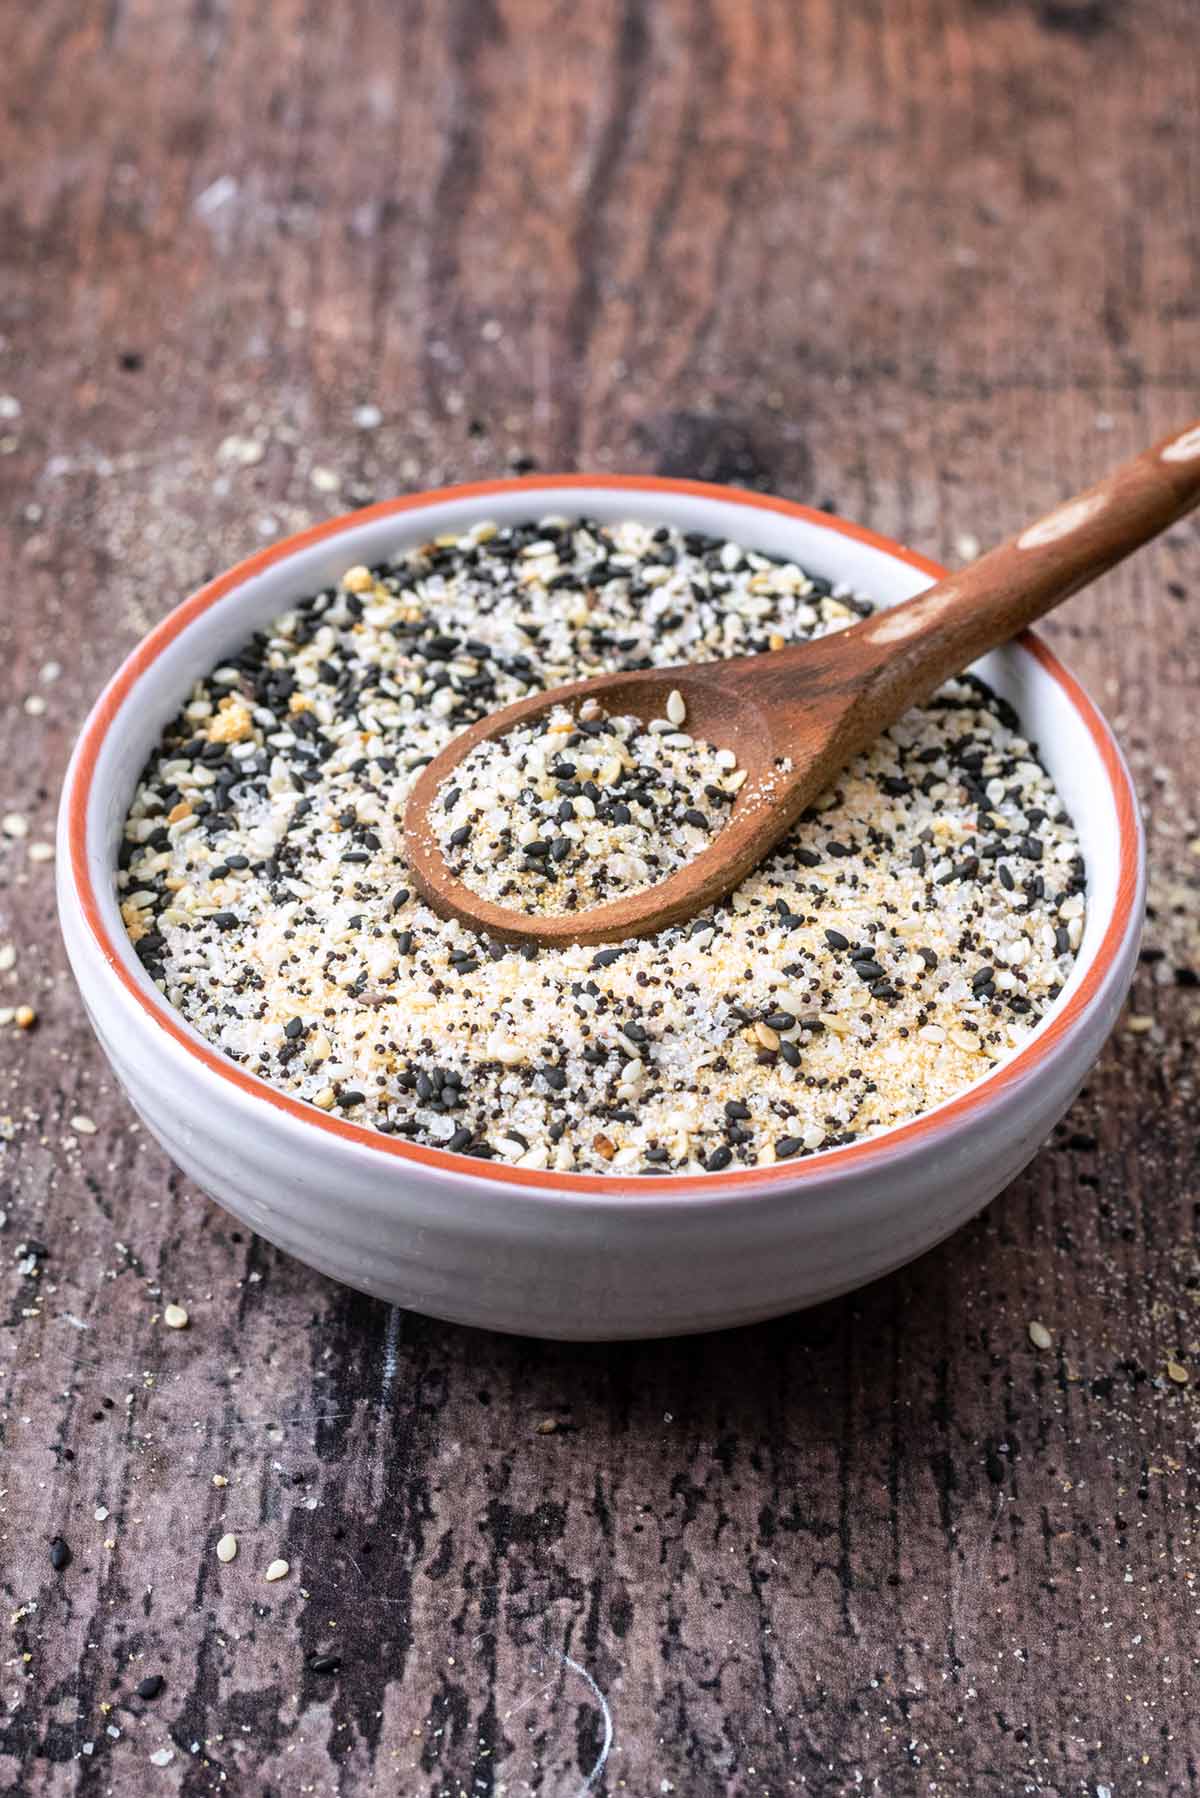 A spoon lifting some bagel seasoning from a small bowl.